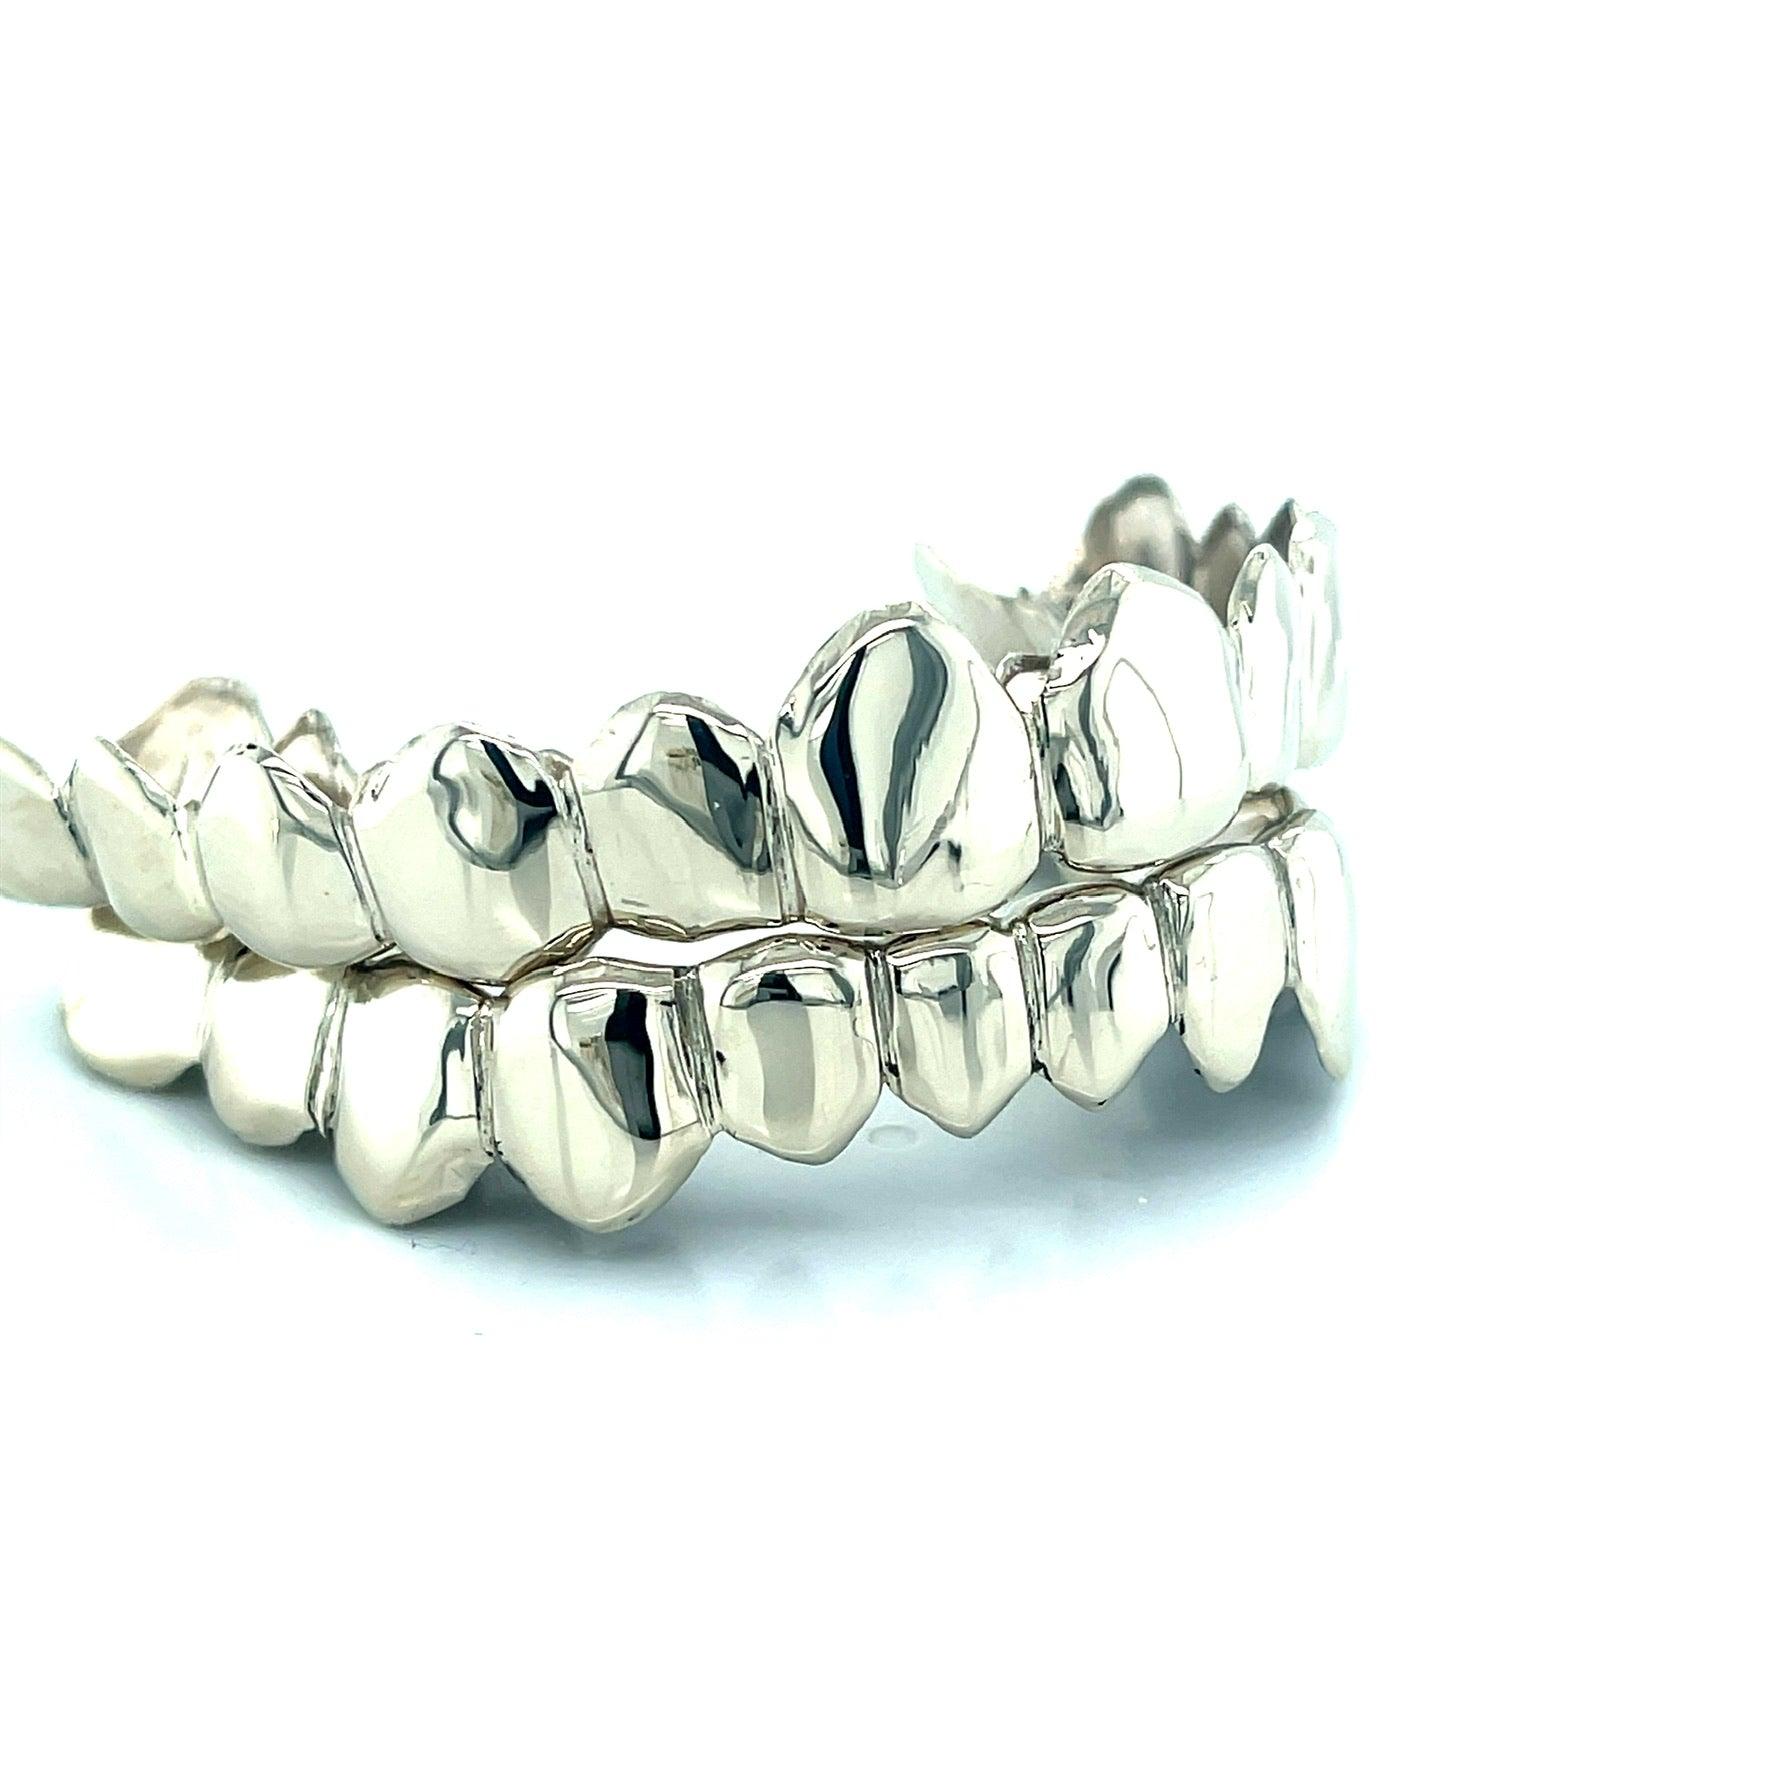 24pc White Gold High Polished Grillz - Seattle Gold Grillz